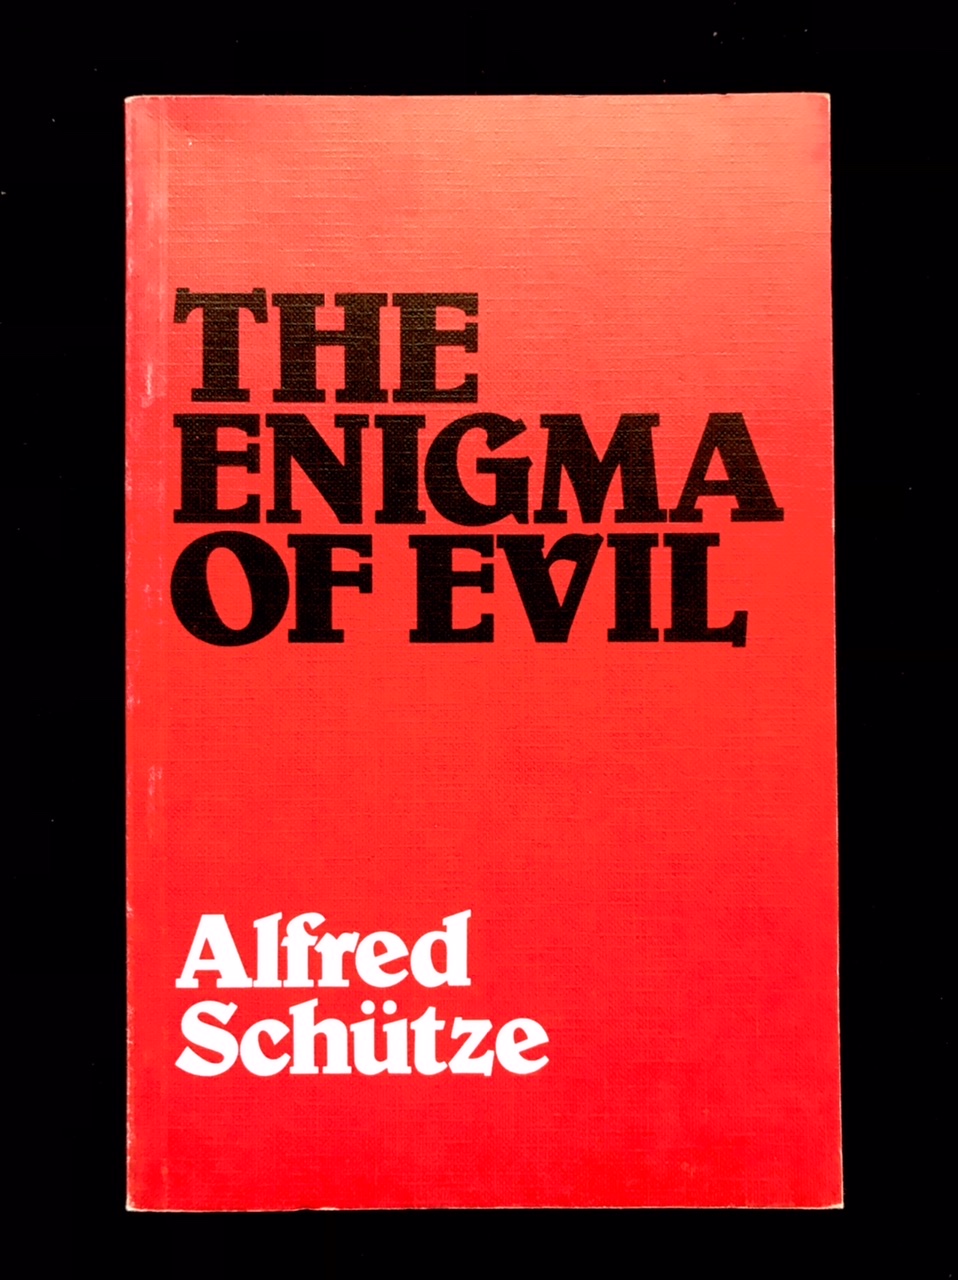 The Enigma Of Evil by Alfred Schütze